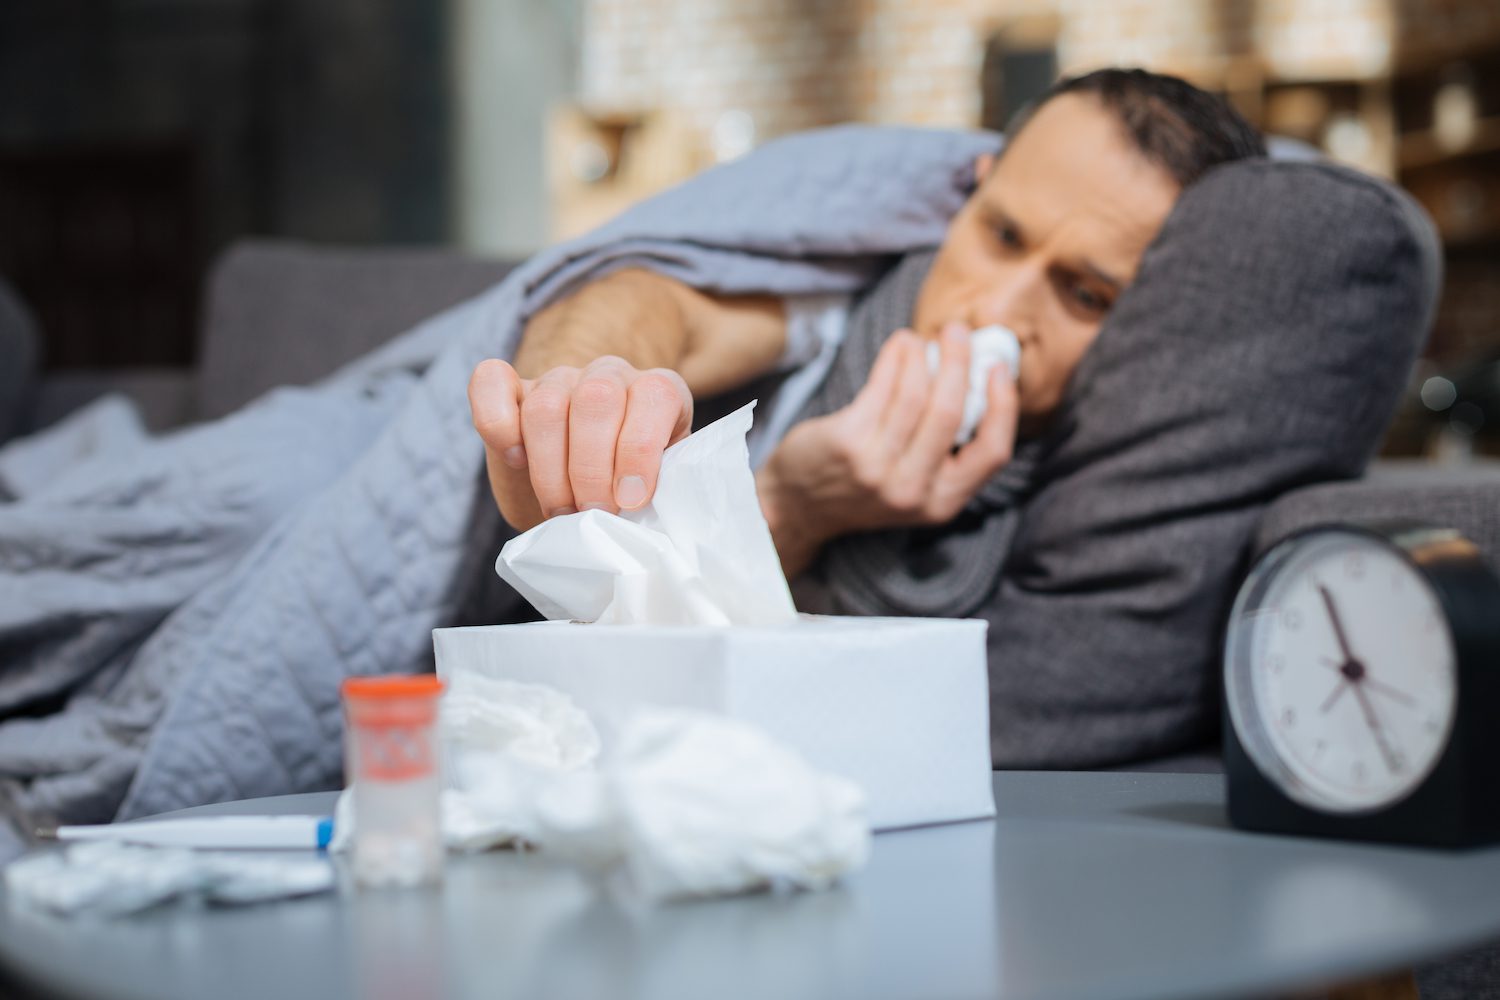 https://www.sleepfoundation.org/wp-content/uploads/2021/09/How-to-Sleep-With-a-Cough-or-a-Cold.jpg